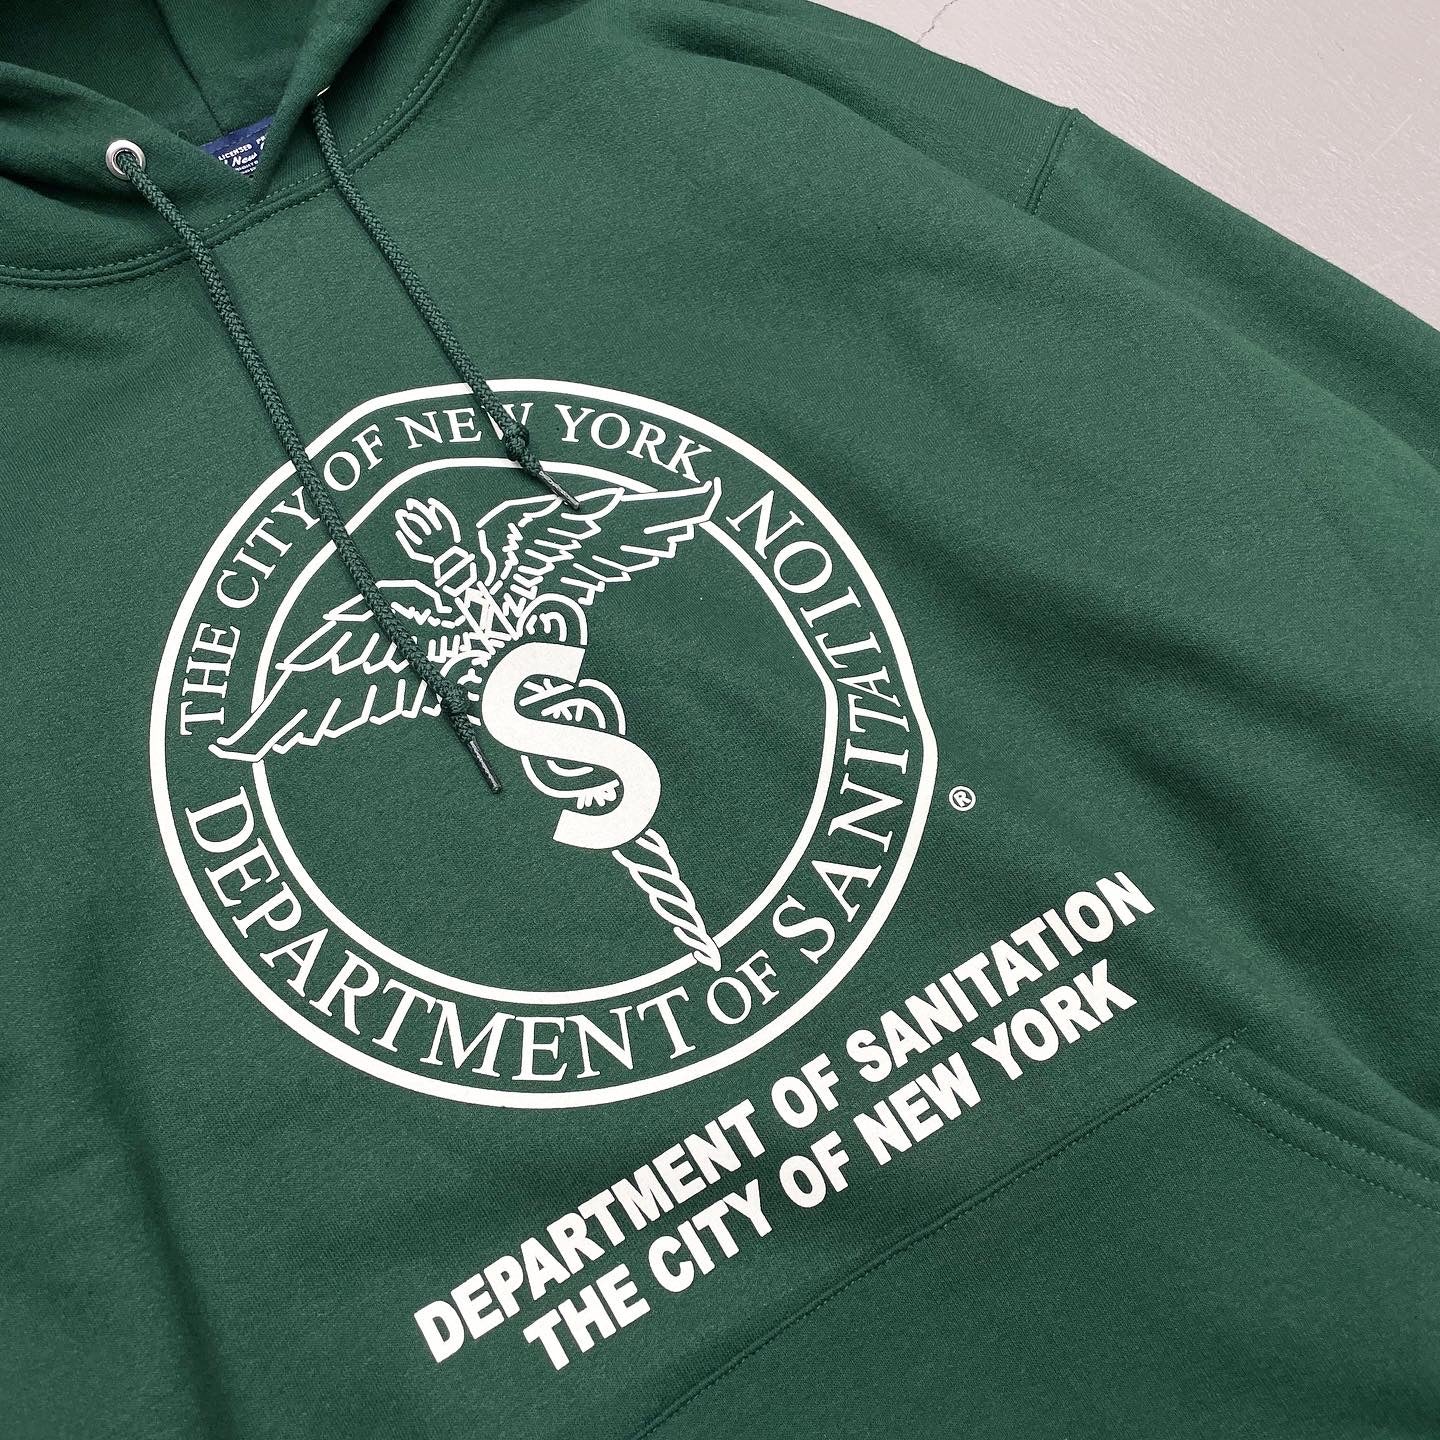 DSNY Official Pullover Hoodie